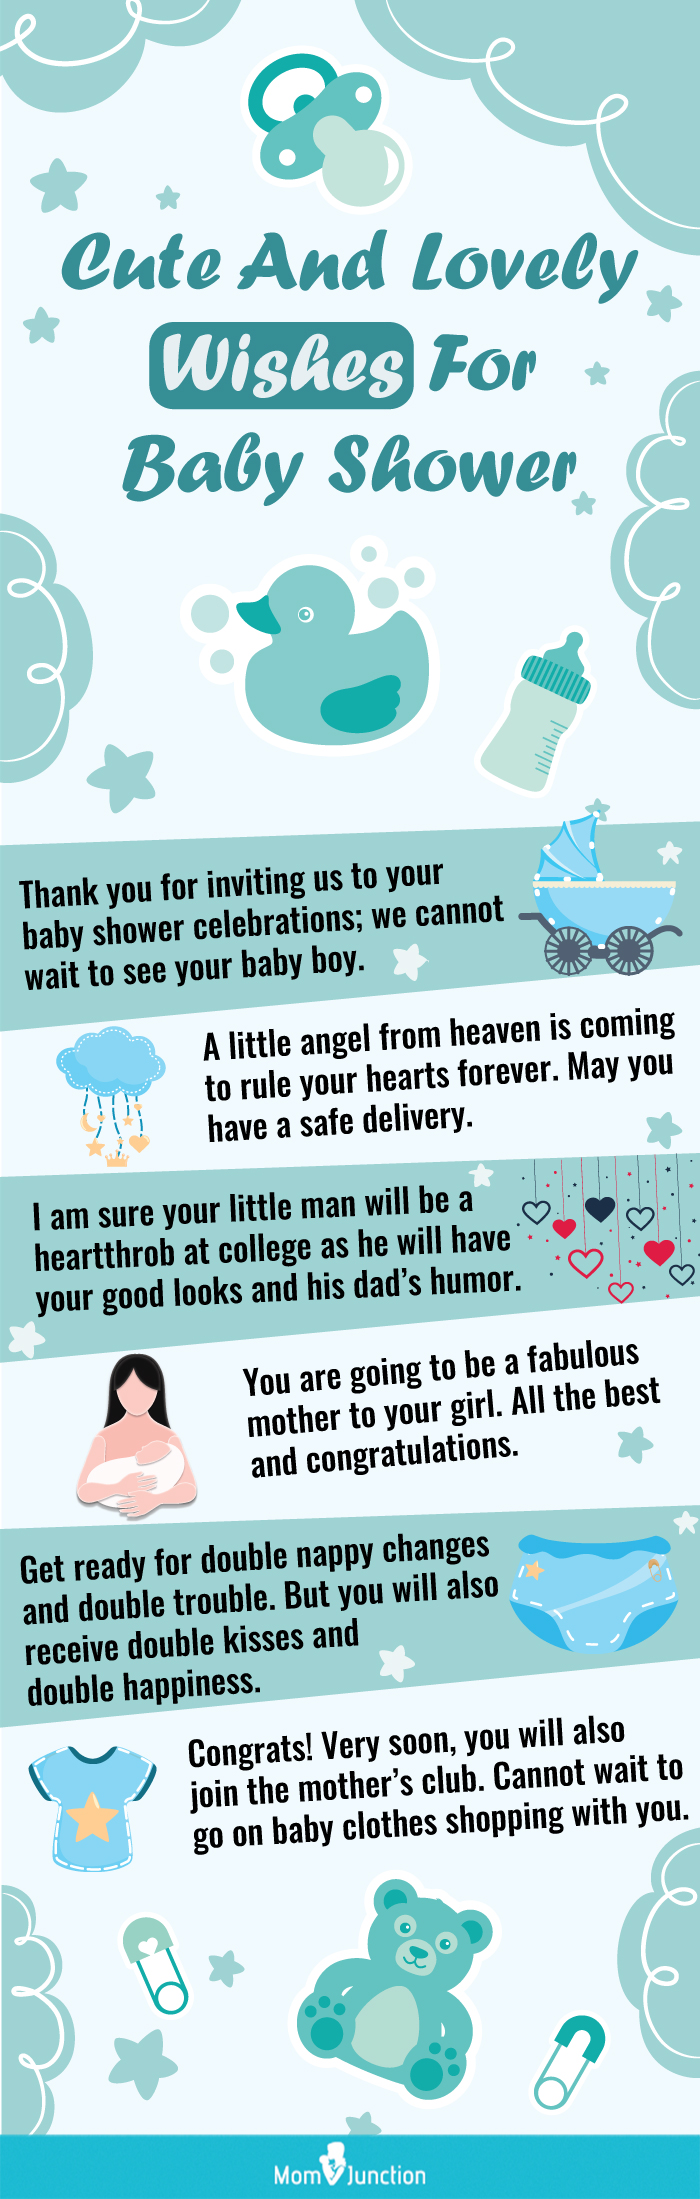 Baby shower wishes: What to write in a baby shower card